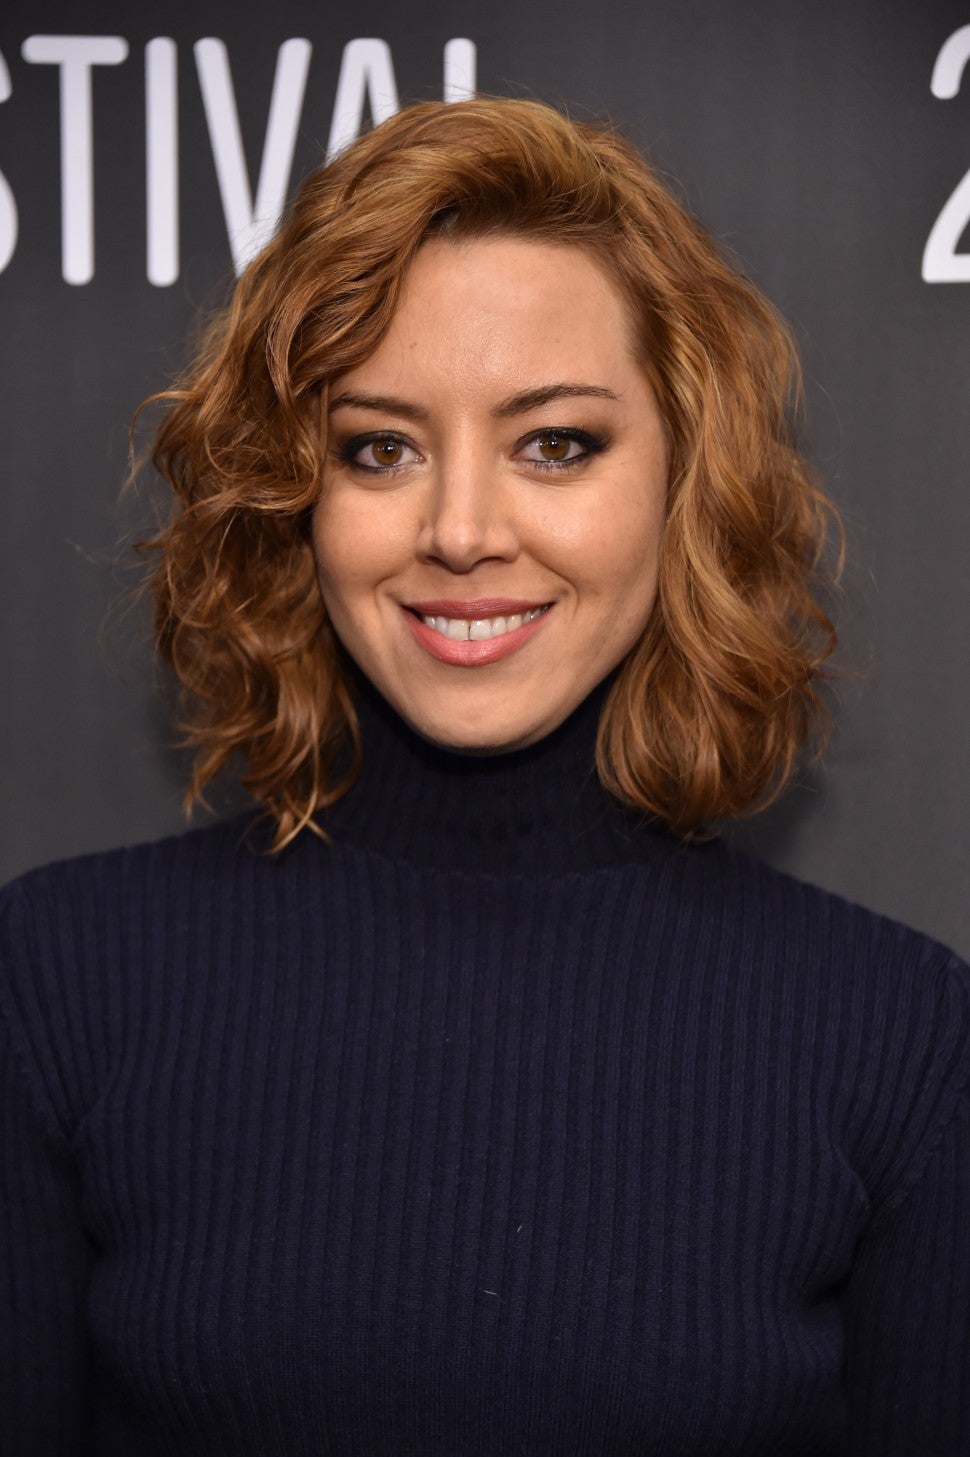 Aubrey Plaza Is Nearly Unrecognizable as a Redhead -- See the Pic! | Entertainment Tonight